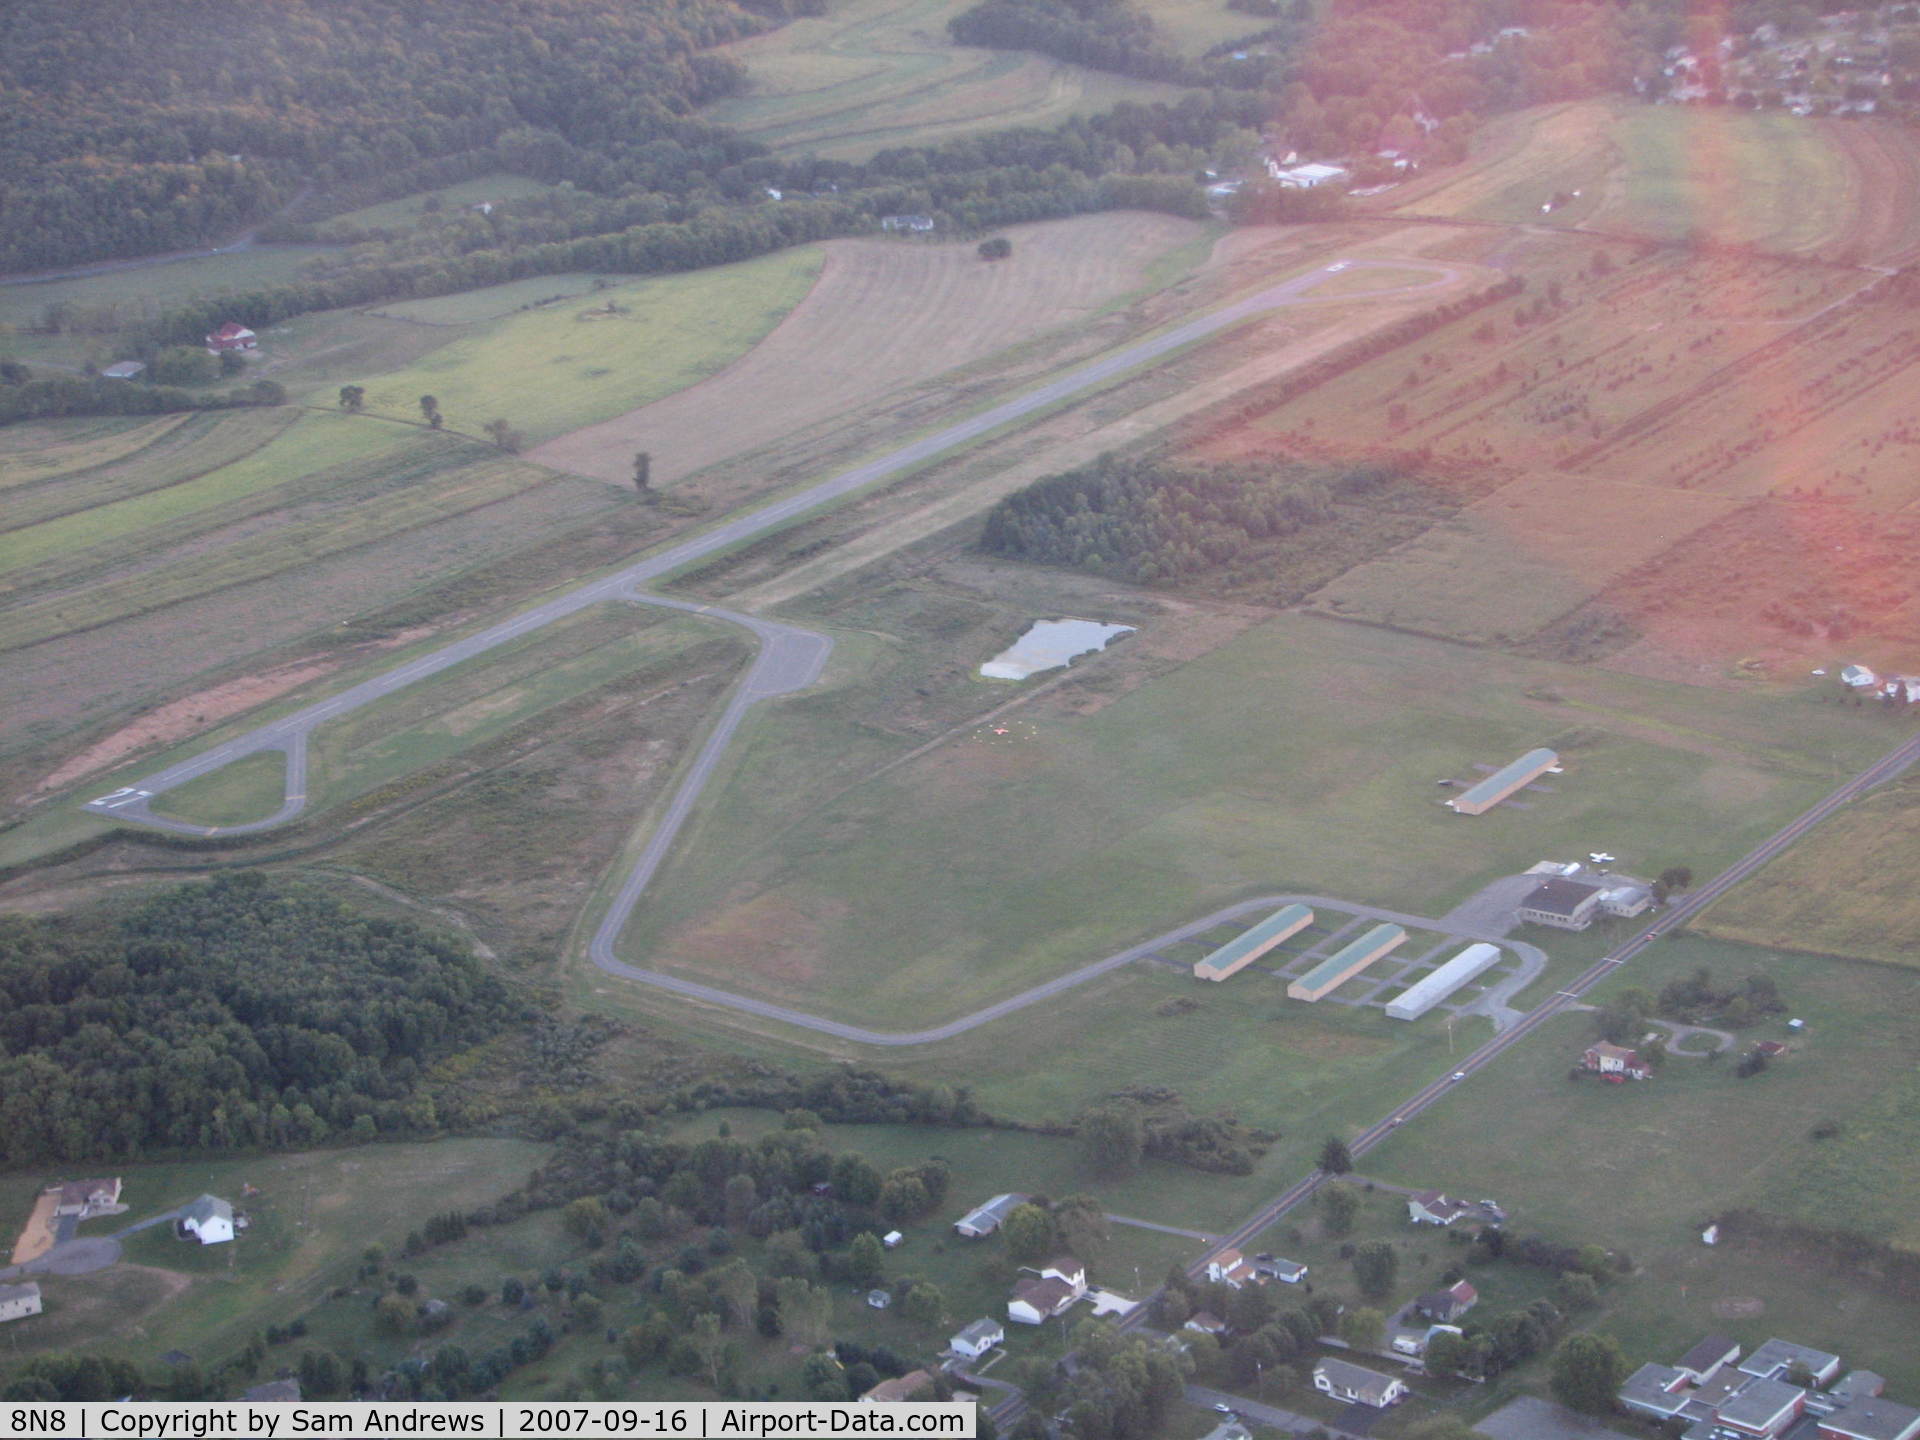 Danville Airport (8N8) - Second try